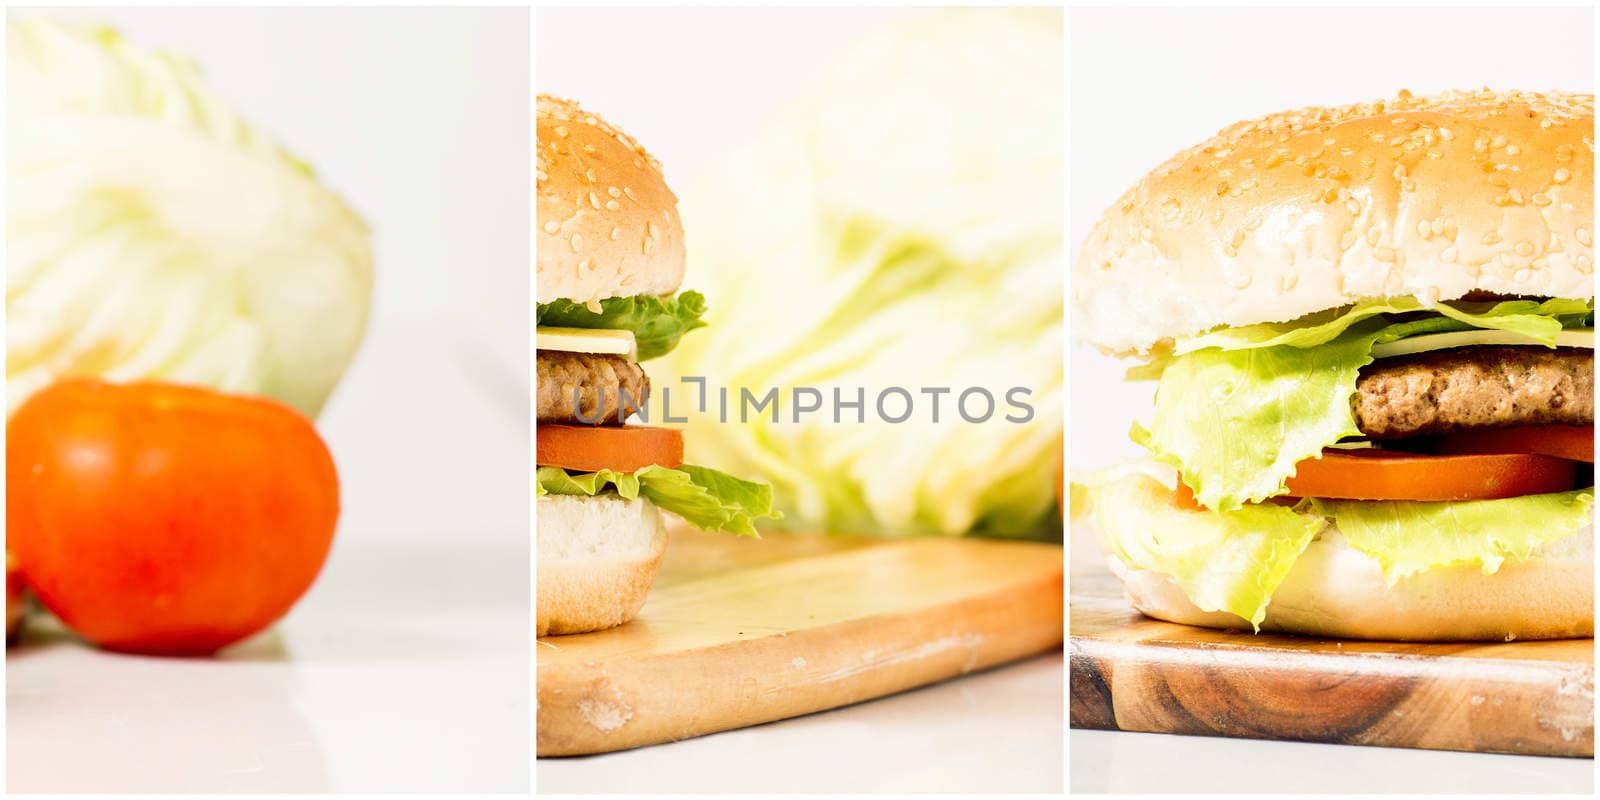 Hamburger with cheese and ingredients on a white background with a multi panel effect.